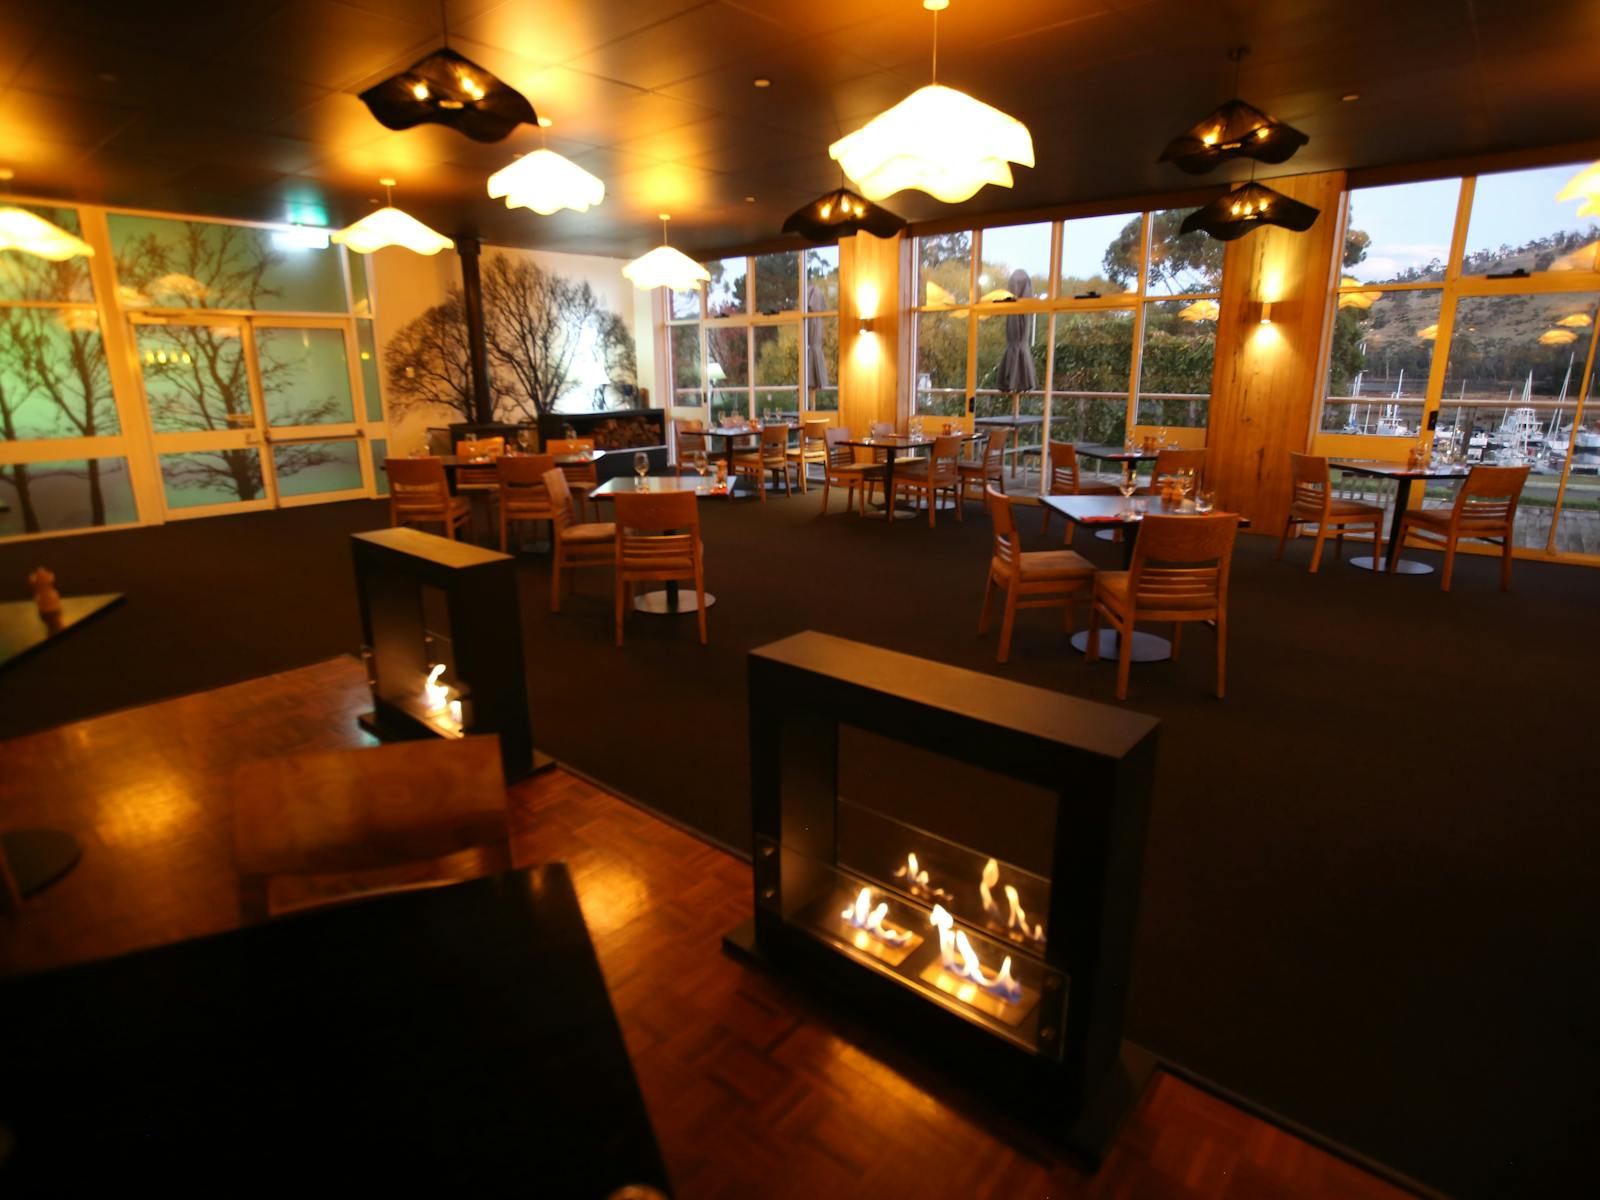 Restaurant with tables and chairs. View from windows out to the Huon River